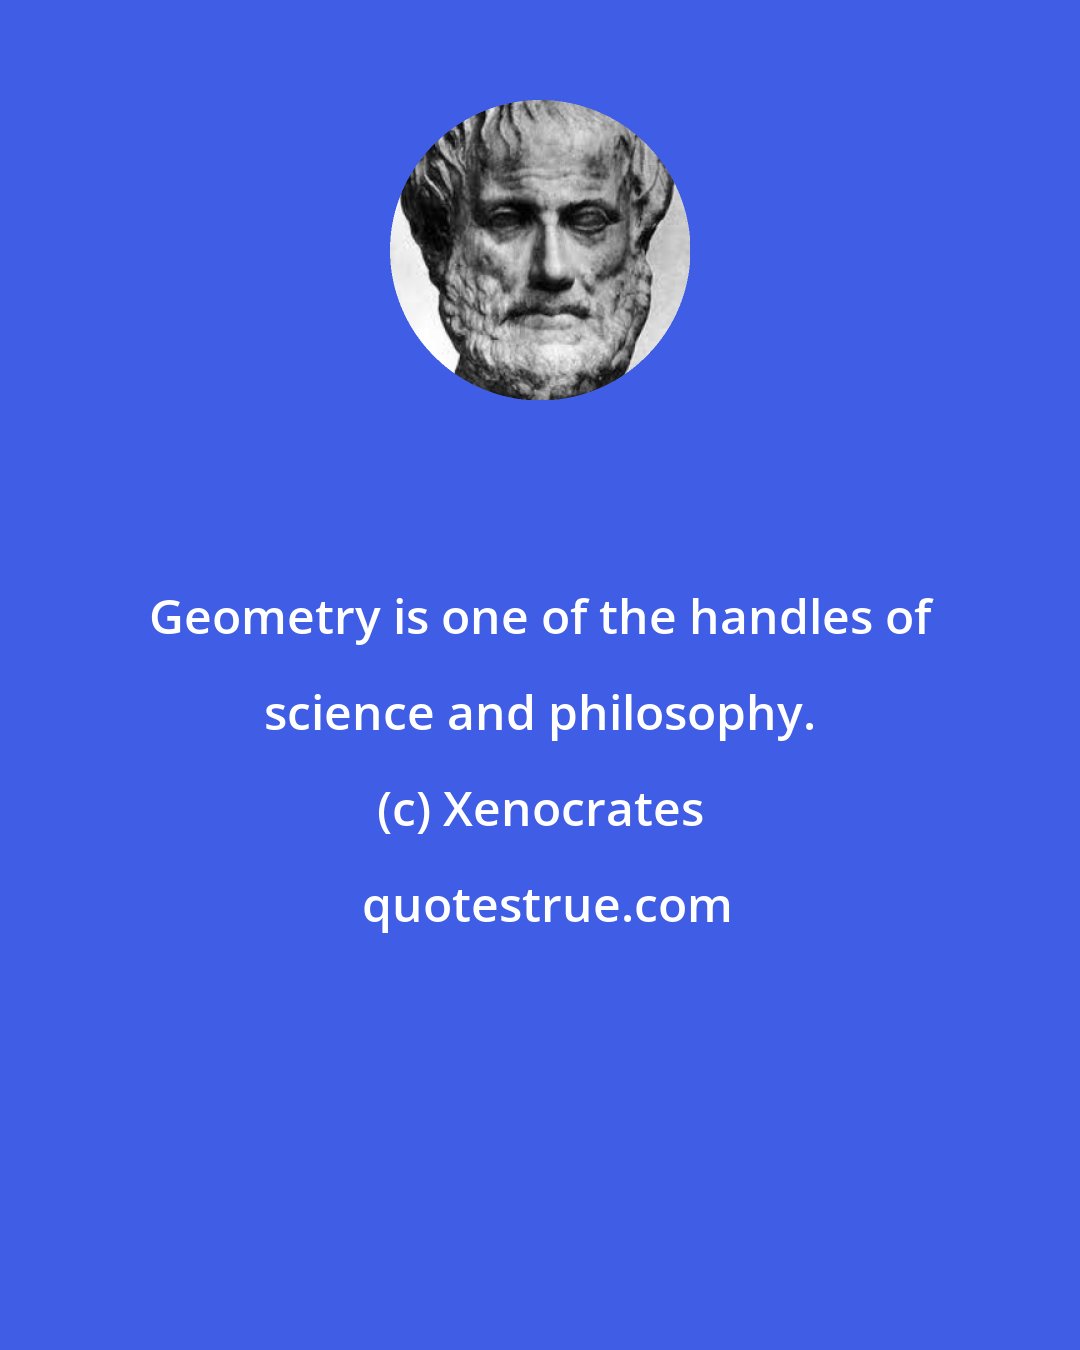 Xenocrates: Geometry is one of the handles of science and philosophy.